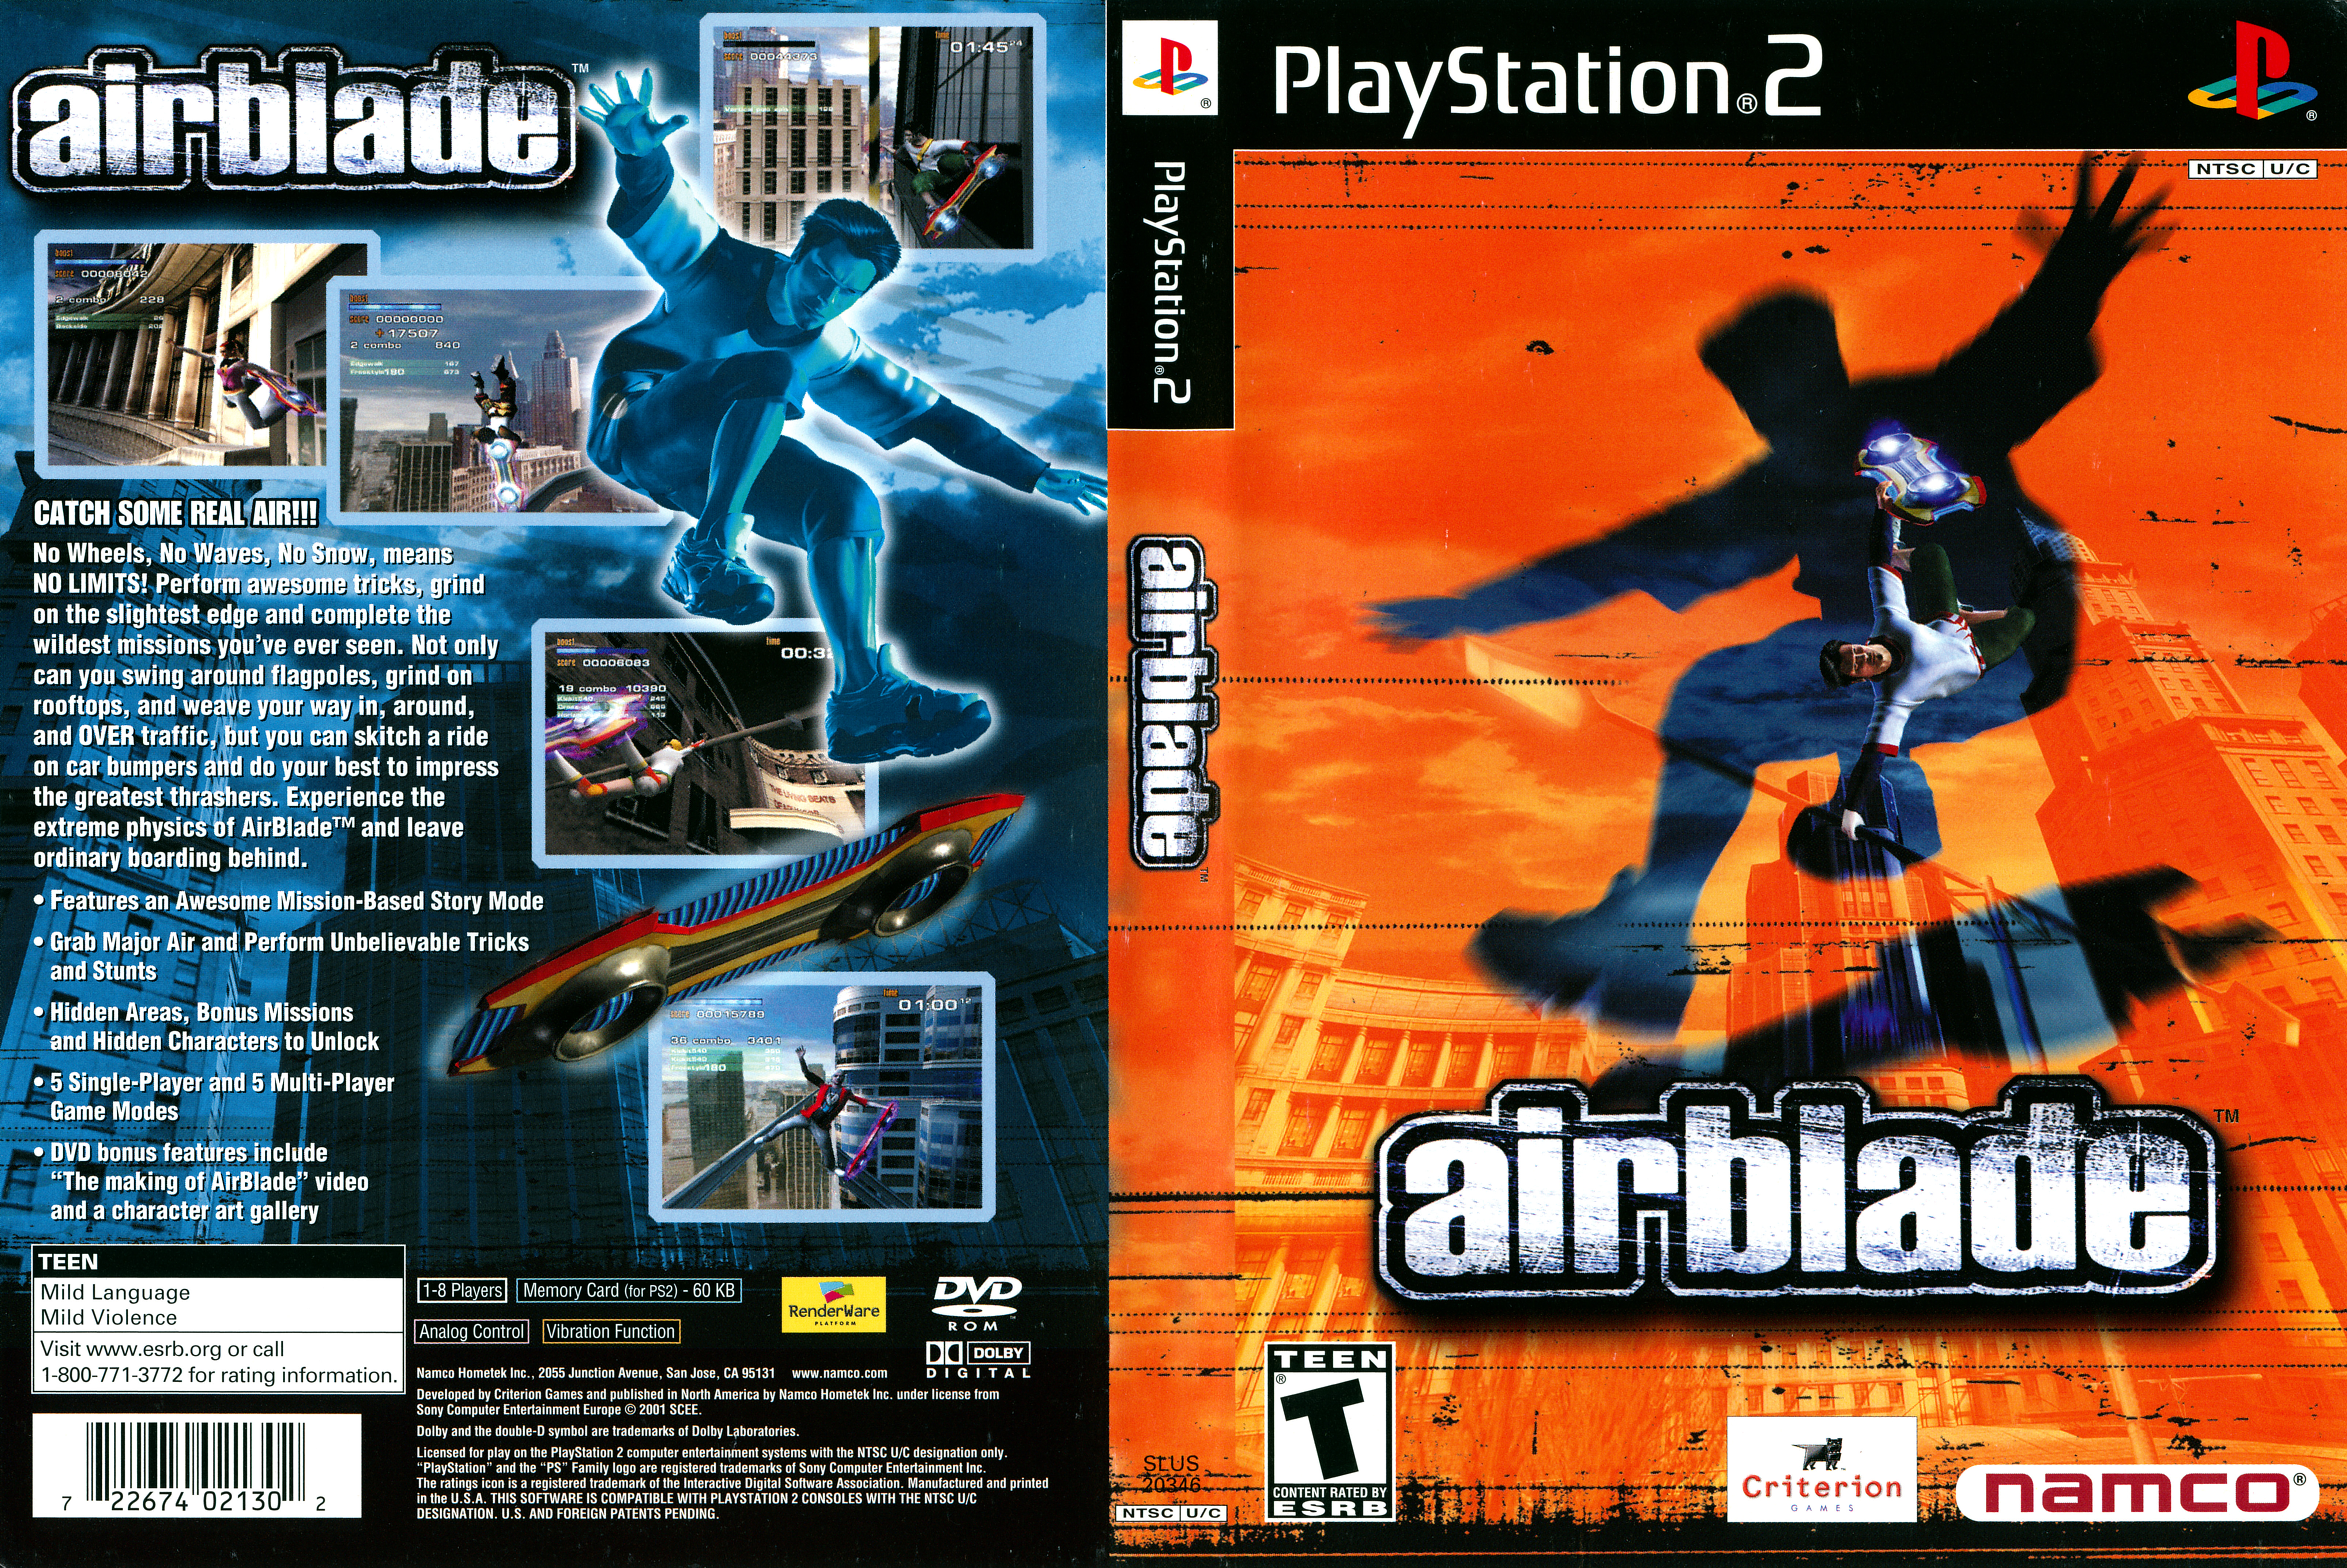 Playstation 2 русский язык. Airblade ps2. Airblade the game ps2. MDK 2 Армагеддон для PLAYSTATION 2 обложка. PLAYSTATION 2 игры.